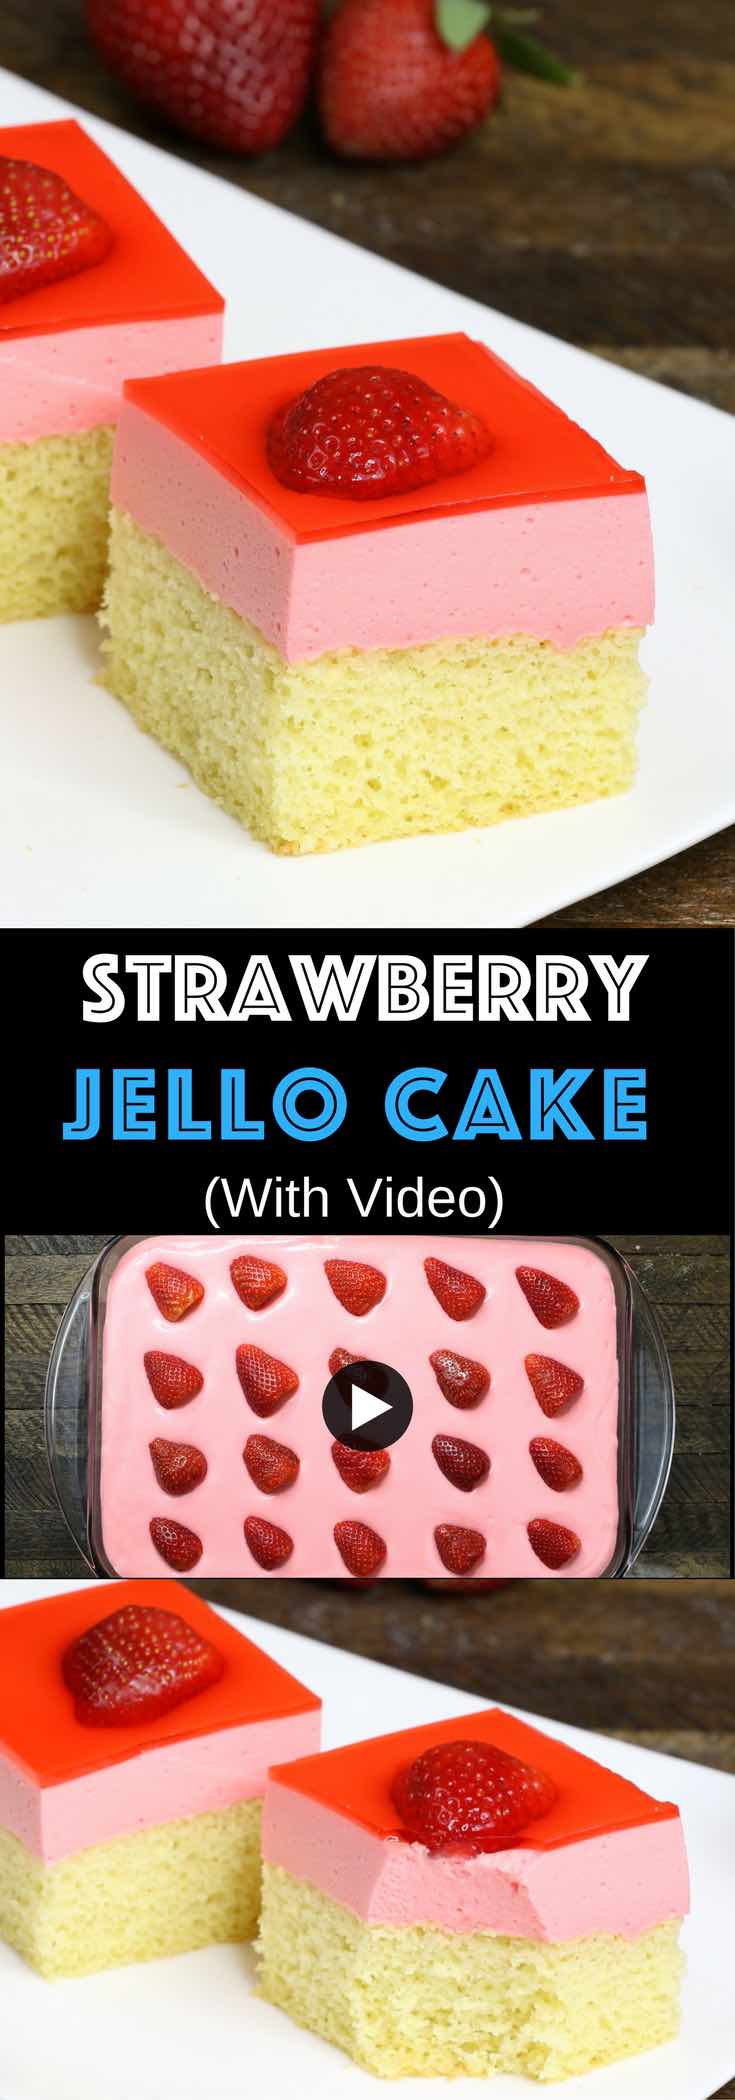 Easy Strawberry Jello Cake – A beautiful make-ahead dessert with 3 layers for a party! Smooth and creamy Jello fillings between yellow cake and bright red strawberry layers. So Good! Great for holiday and birthday parties. Easy recipe, party desserts. Vegetarian. Video recipe. | Tipbuzz.com